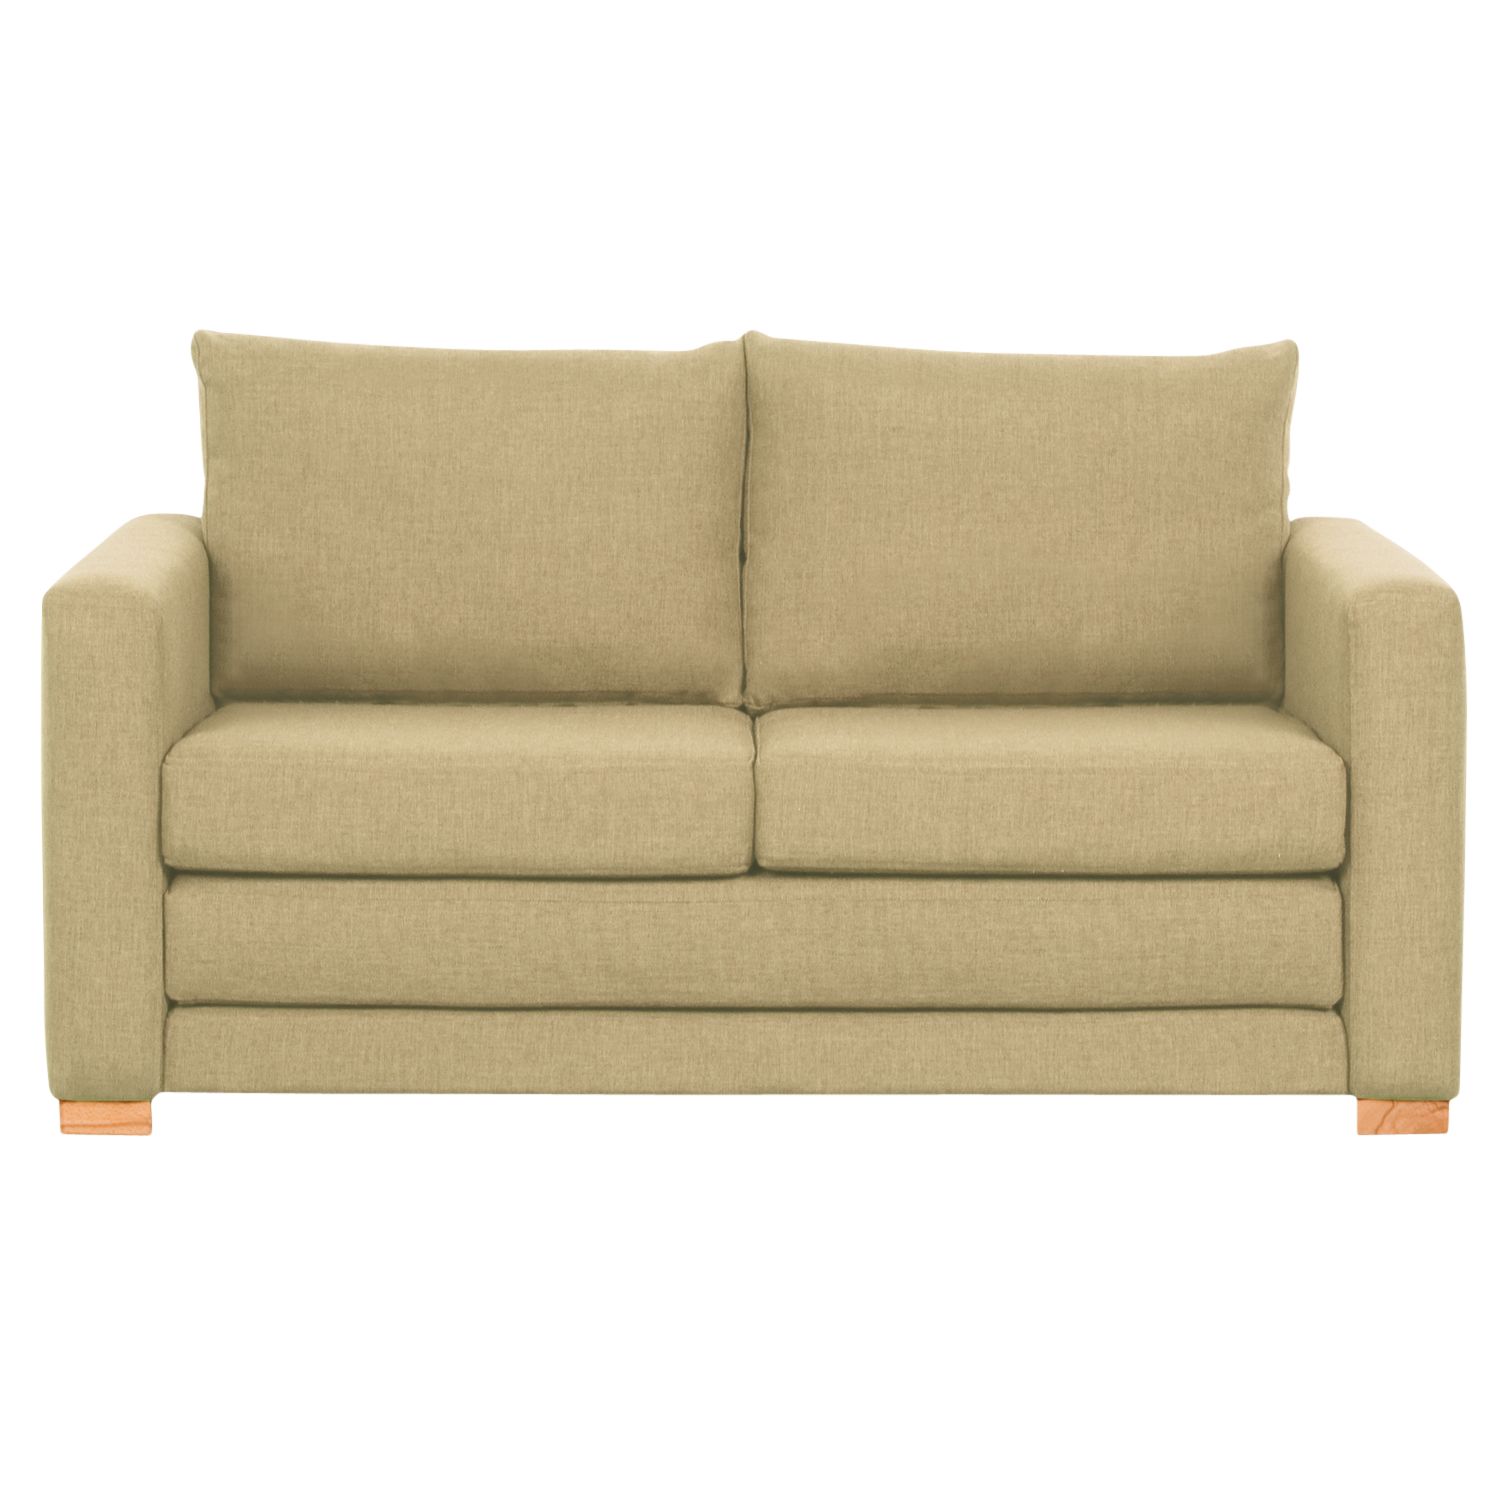 Maisie Small Sofa Bed, Wheat / Light